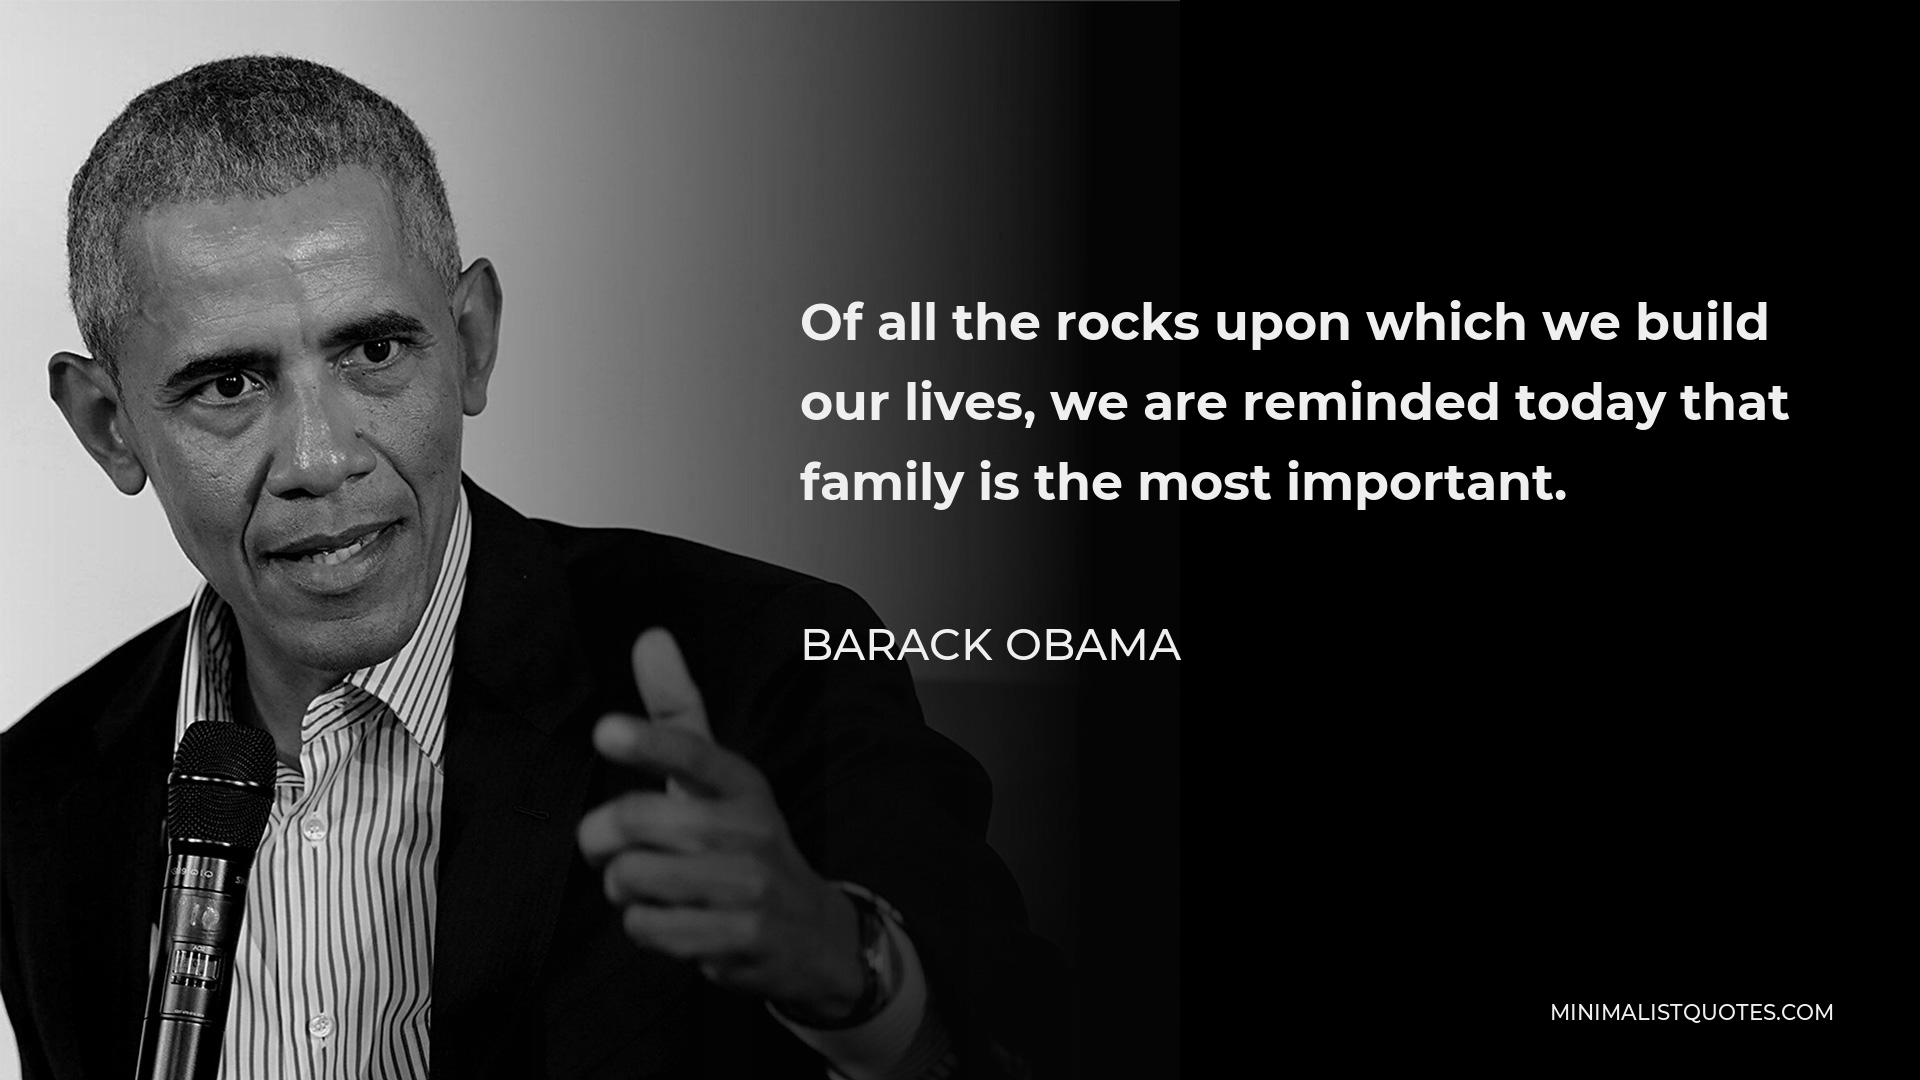 Barack Obama Quote - Of all the rocks upon which we build our lives, we are reminded today that family is the most important.